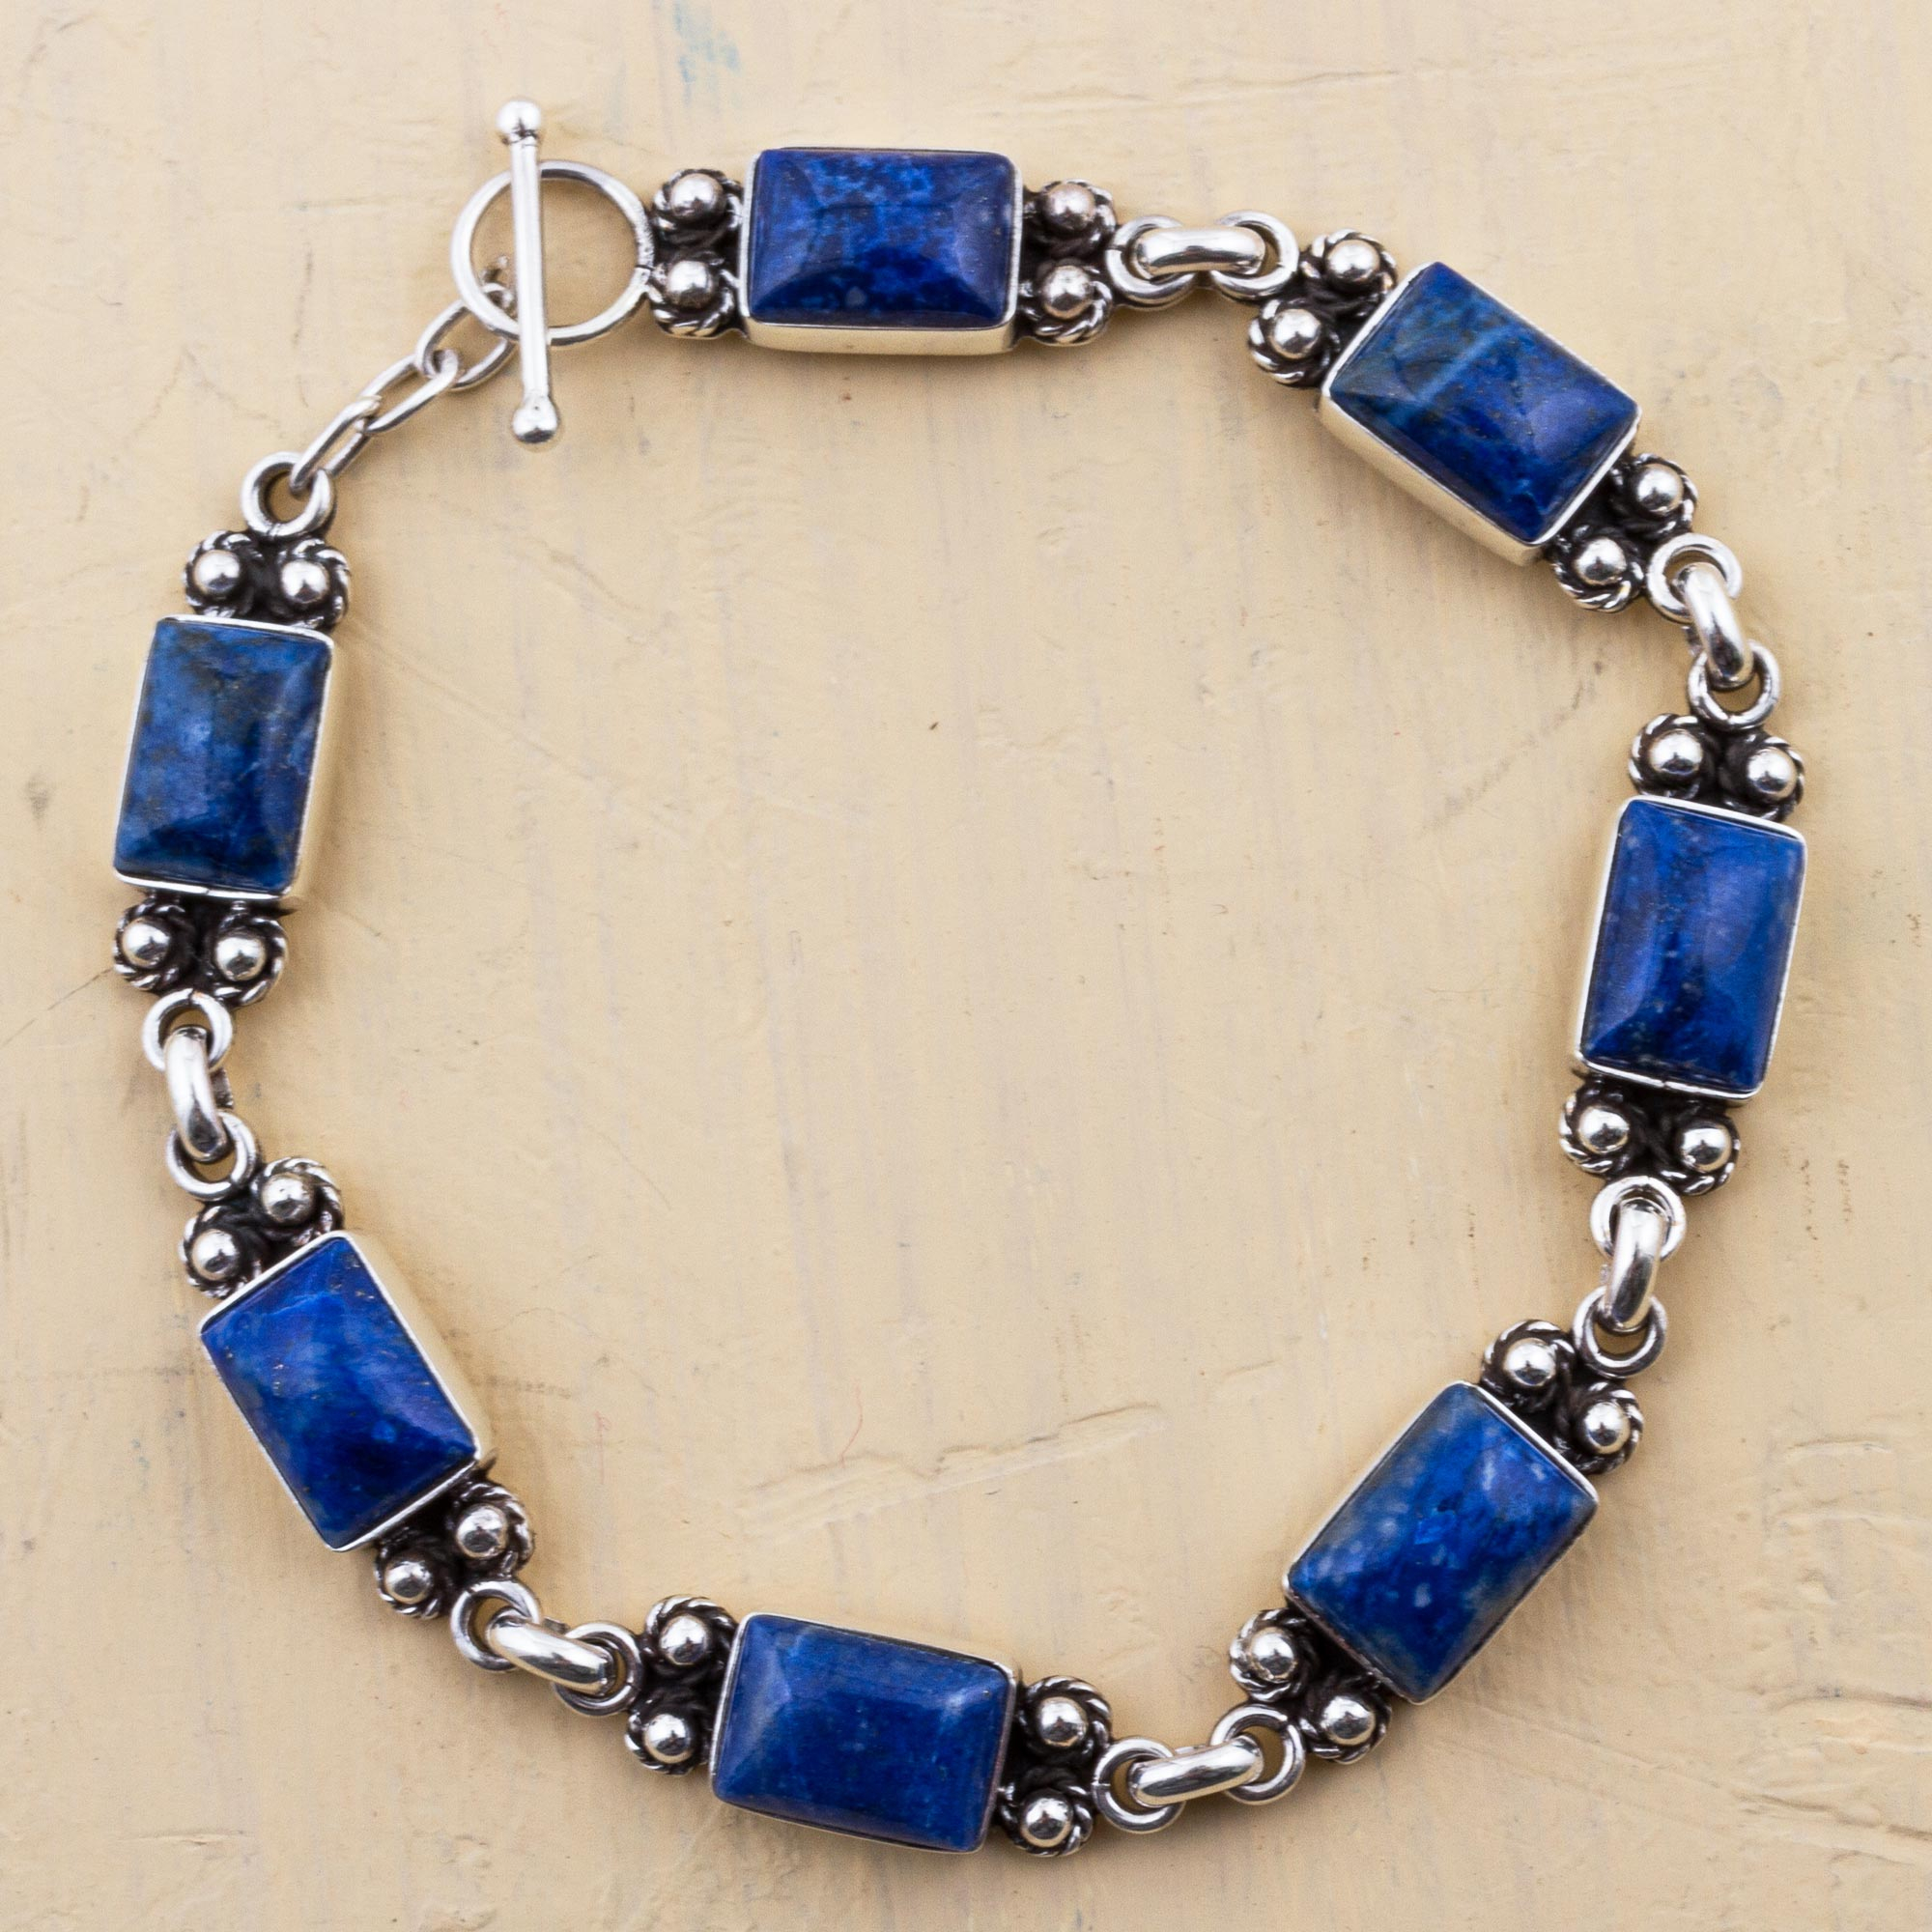 Jewelryonclick Natural Lapis Lazuli 925 Sterling Silver Link Bracelets For Women Bezel Style Jewelry Gift 